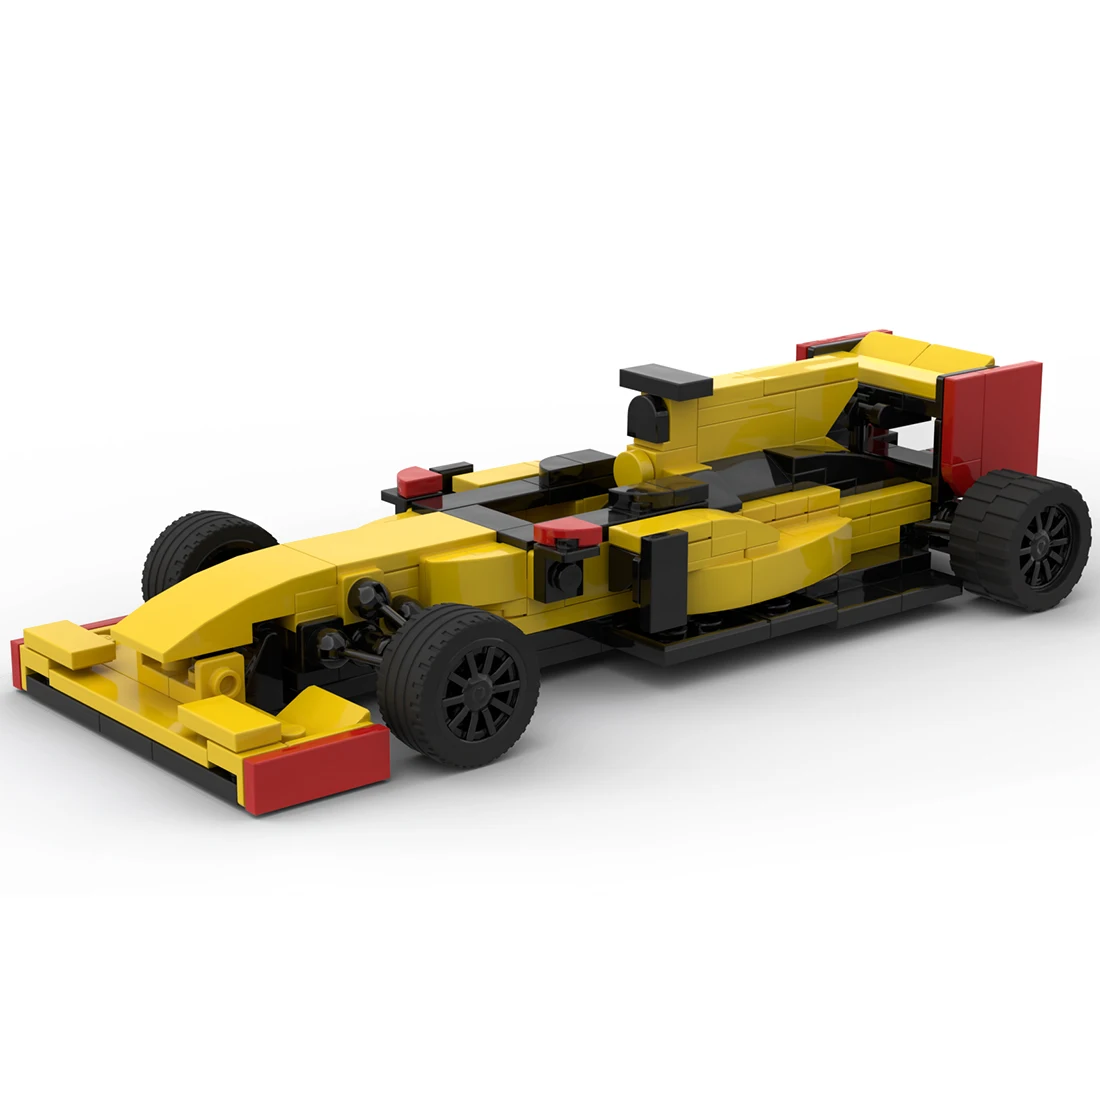 

Authorized MOC-104441 R30 Super Formula Racing Car 248 Parts Speed Champions Building Blocks Set Compatible With 10291 10211